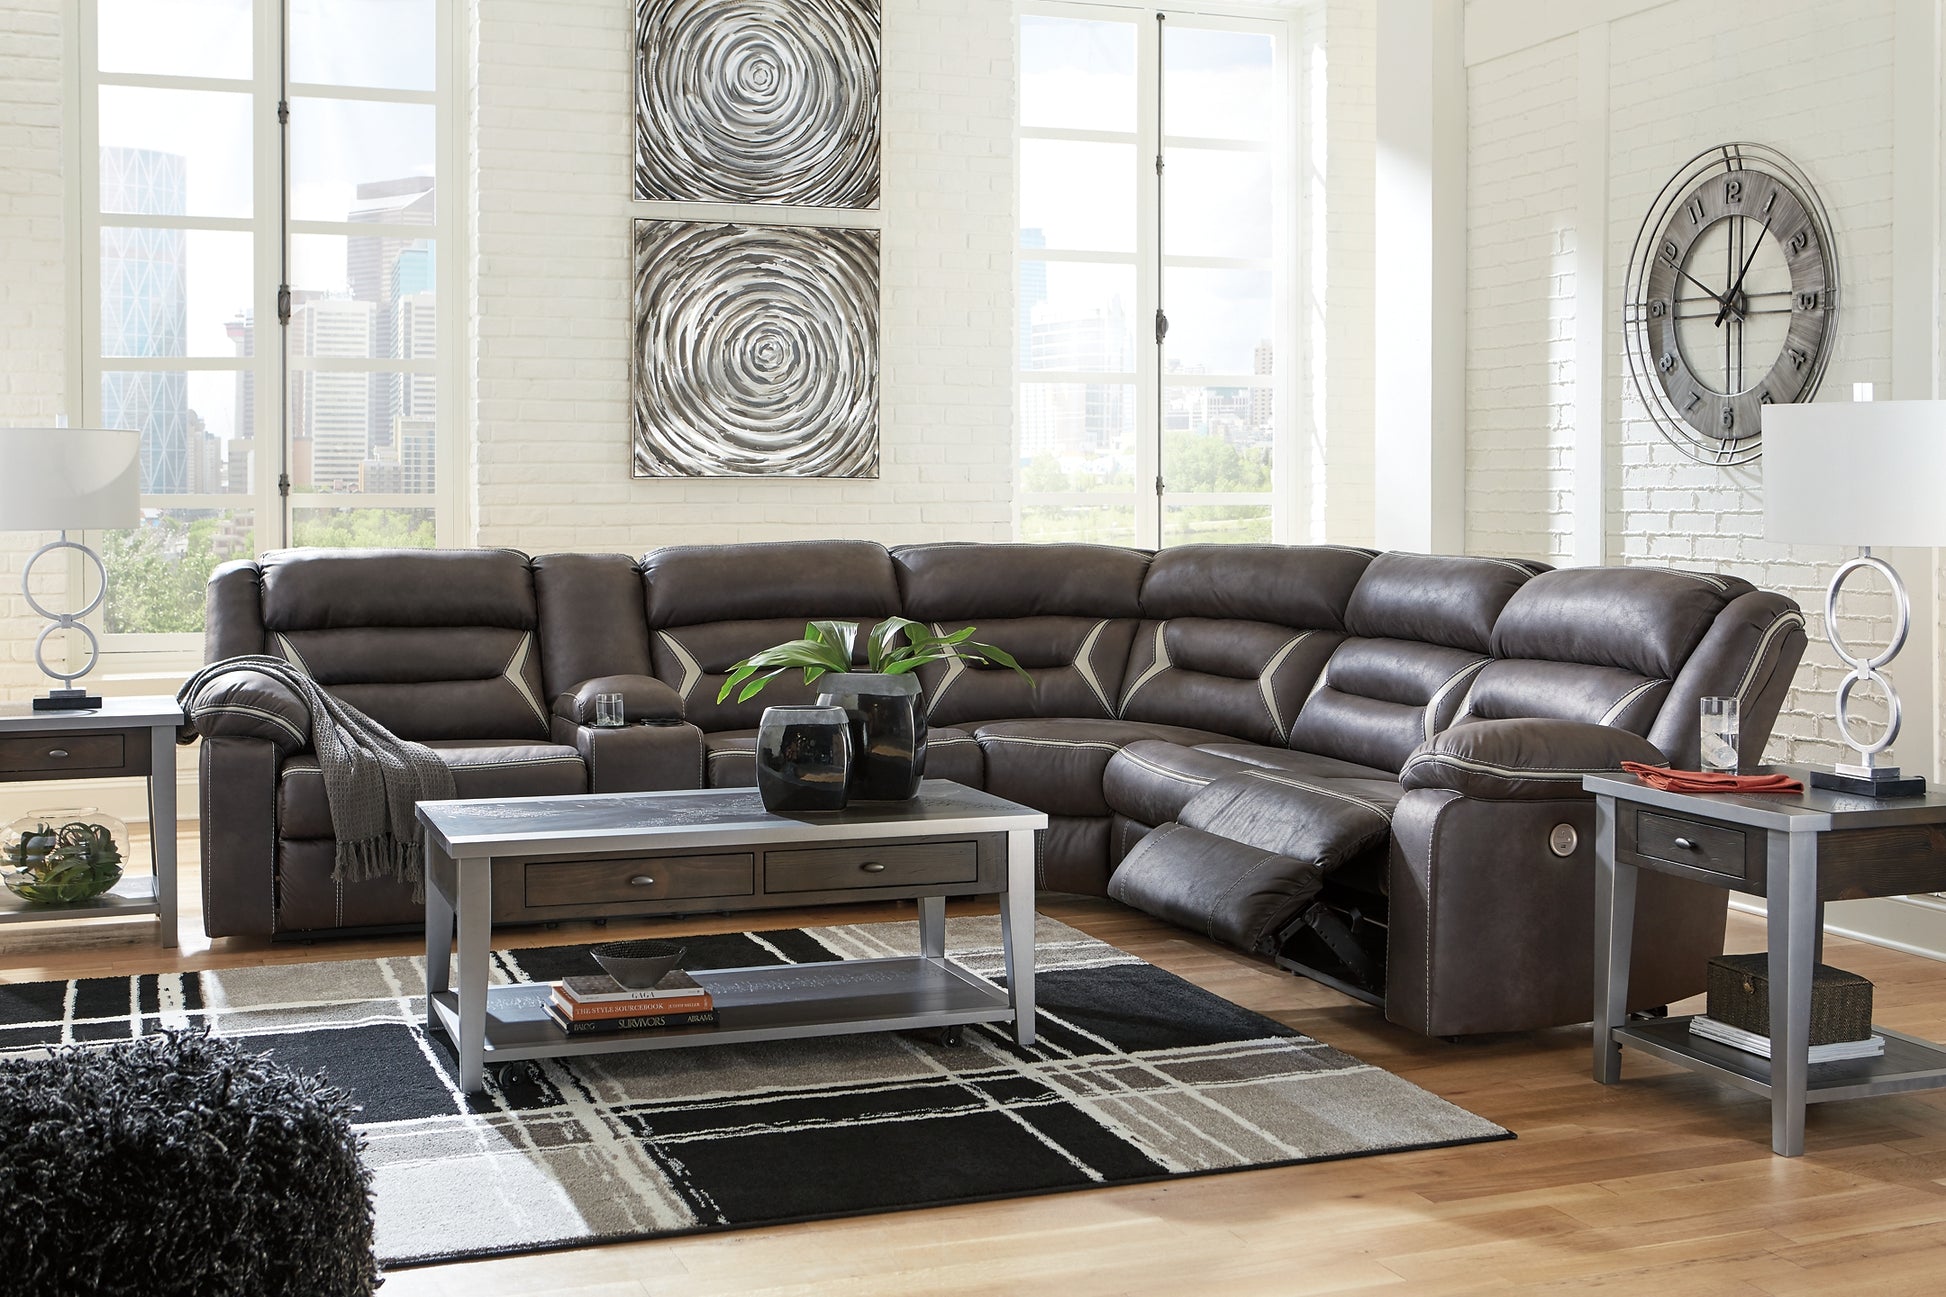 Kincord 4-Piece Sectional with Recliner Wilson Furniture (OH)  in Bridgeport, Ohio. Serving Bridgeport, Yorkville, Bellaire, & Avondale